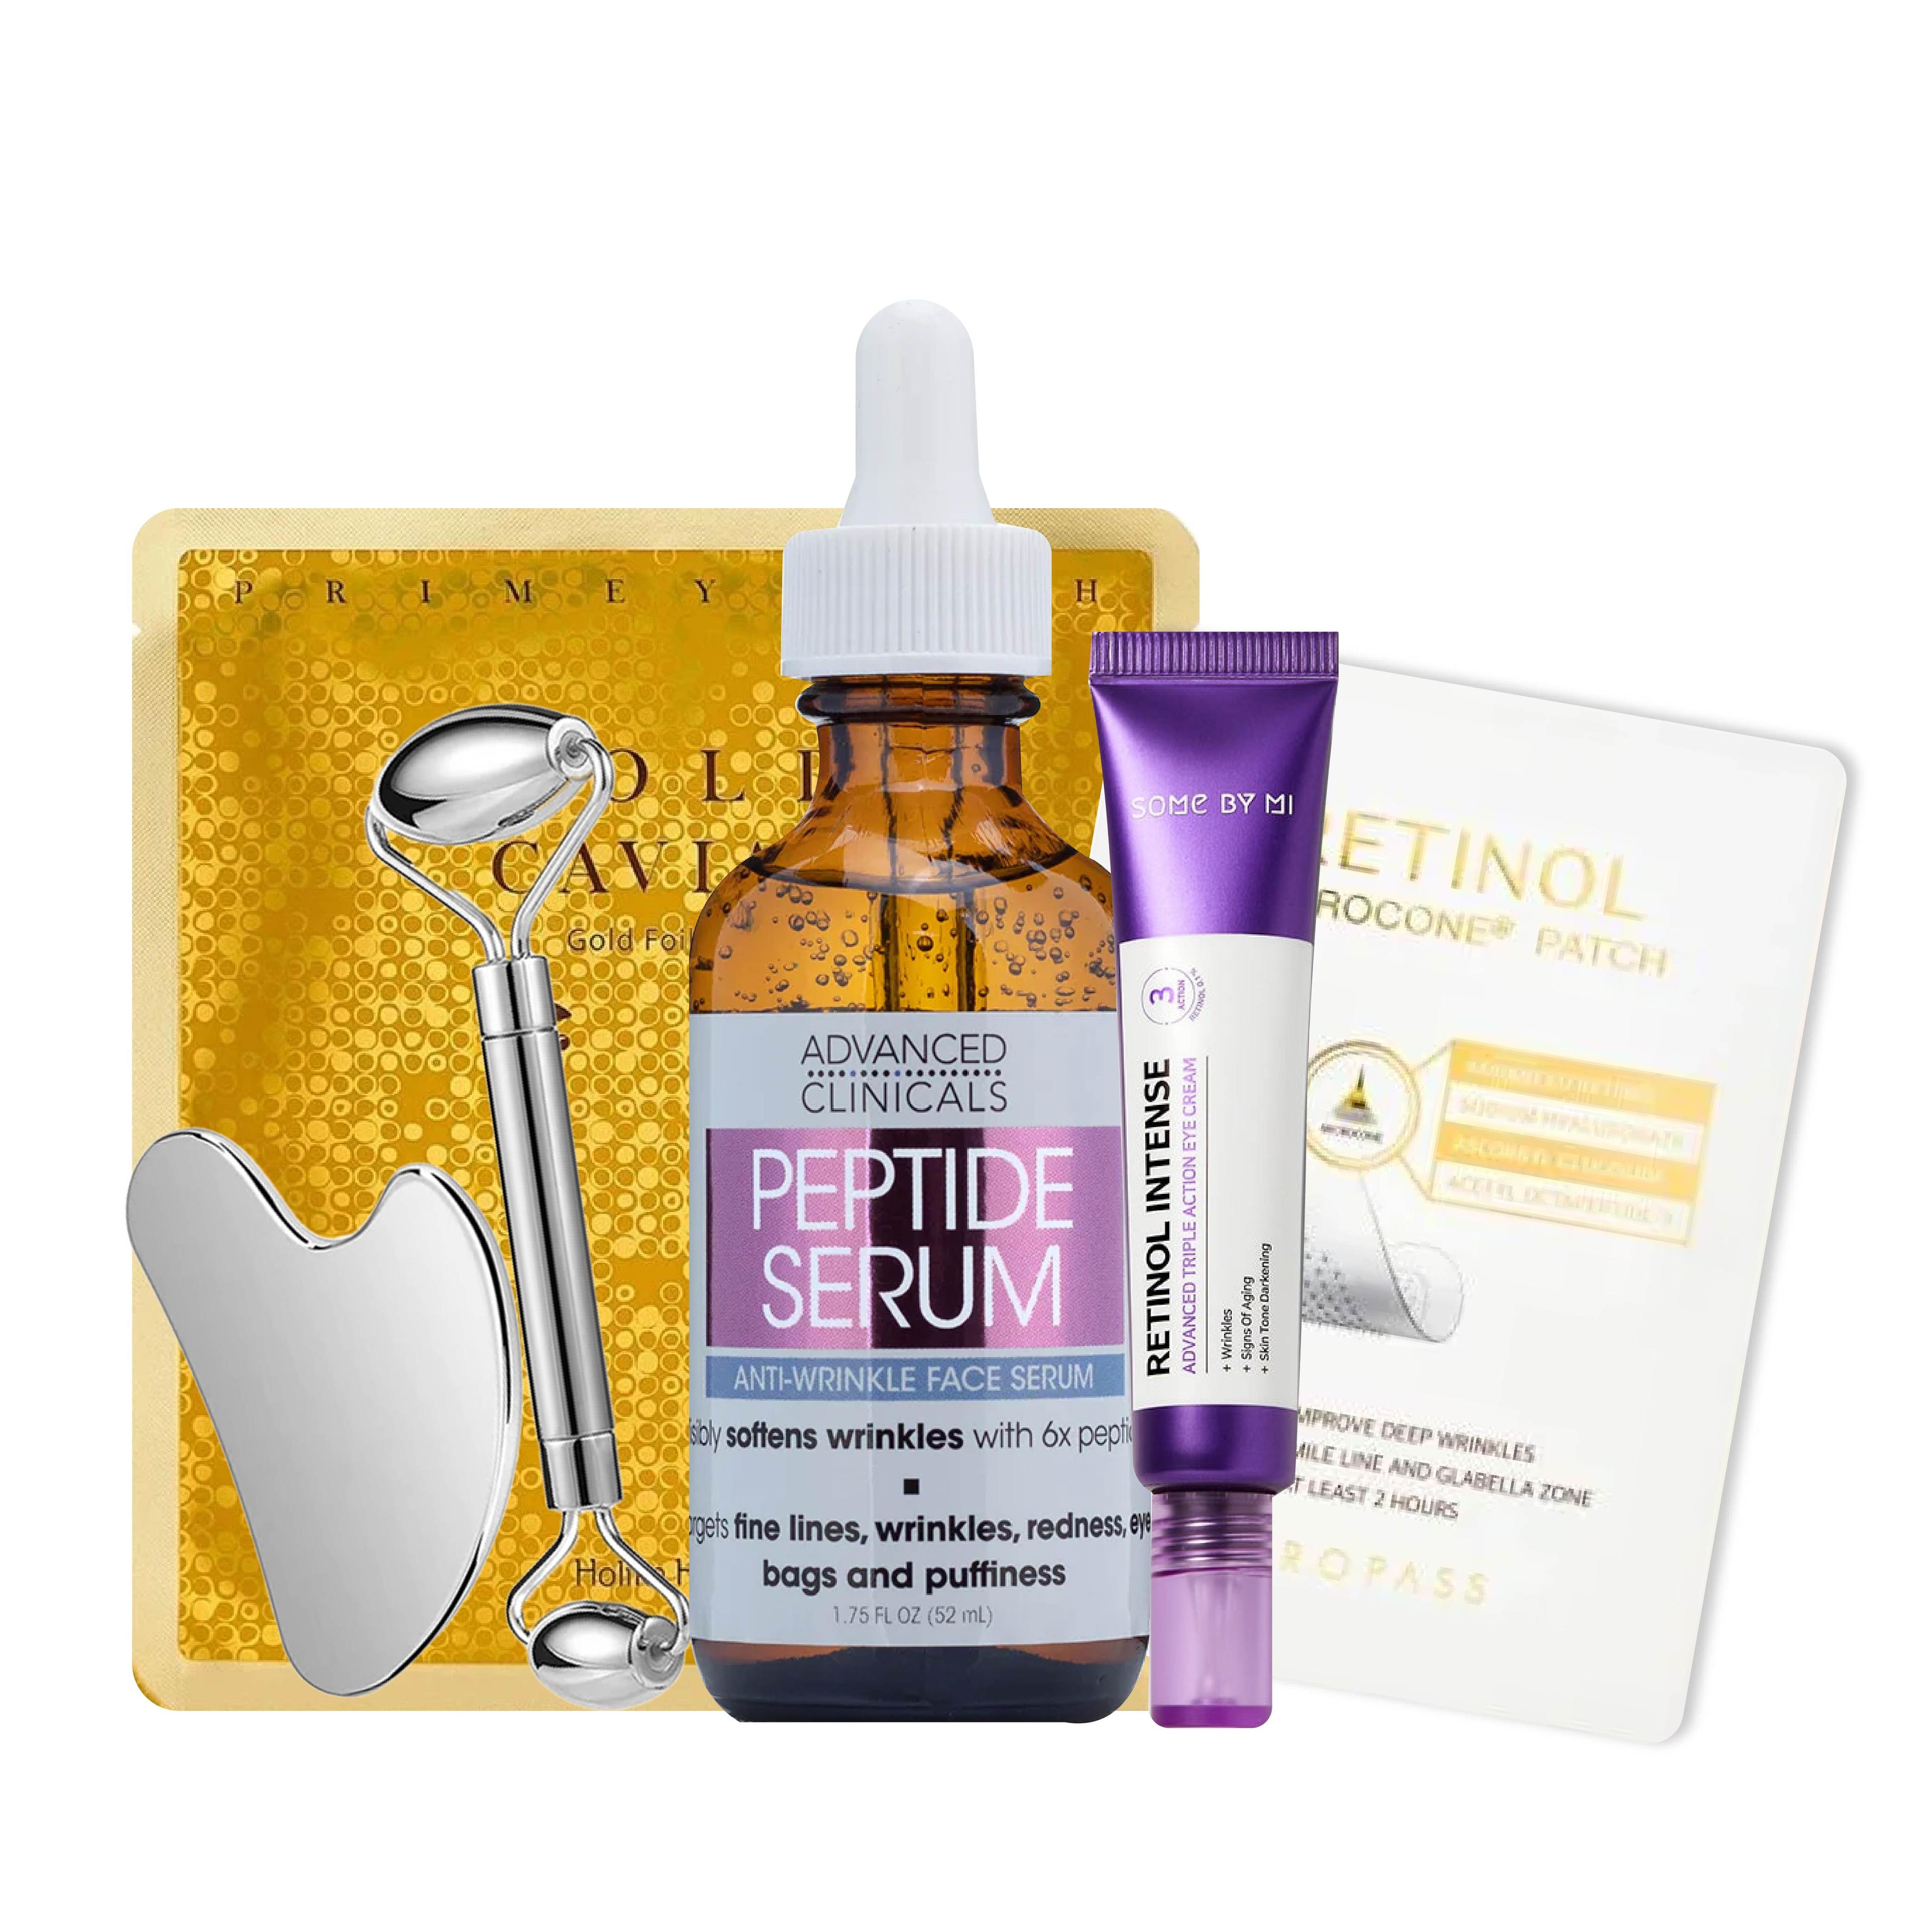 Gift Bundle #10 [Stainless Steel Roller and Gua Sha Anti-aging Facial Massage Gift Set, Retinol Intense Advanced Triple Action Eye Cream, Peptide Anti-wrinkle Face Serum, Prime Youth Gold Caviar Gold